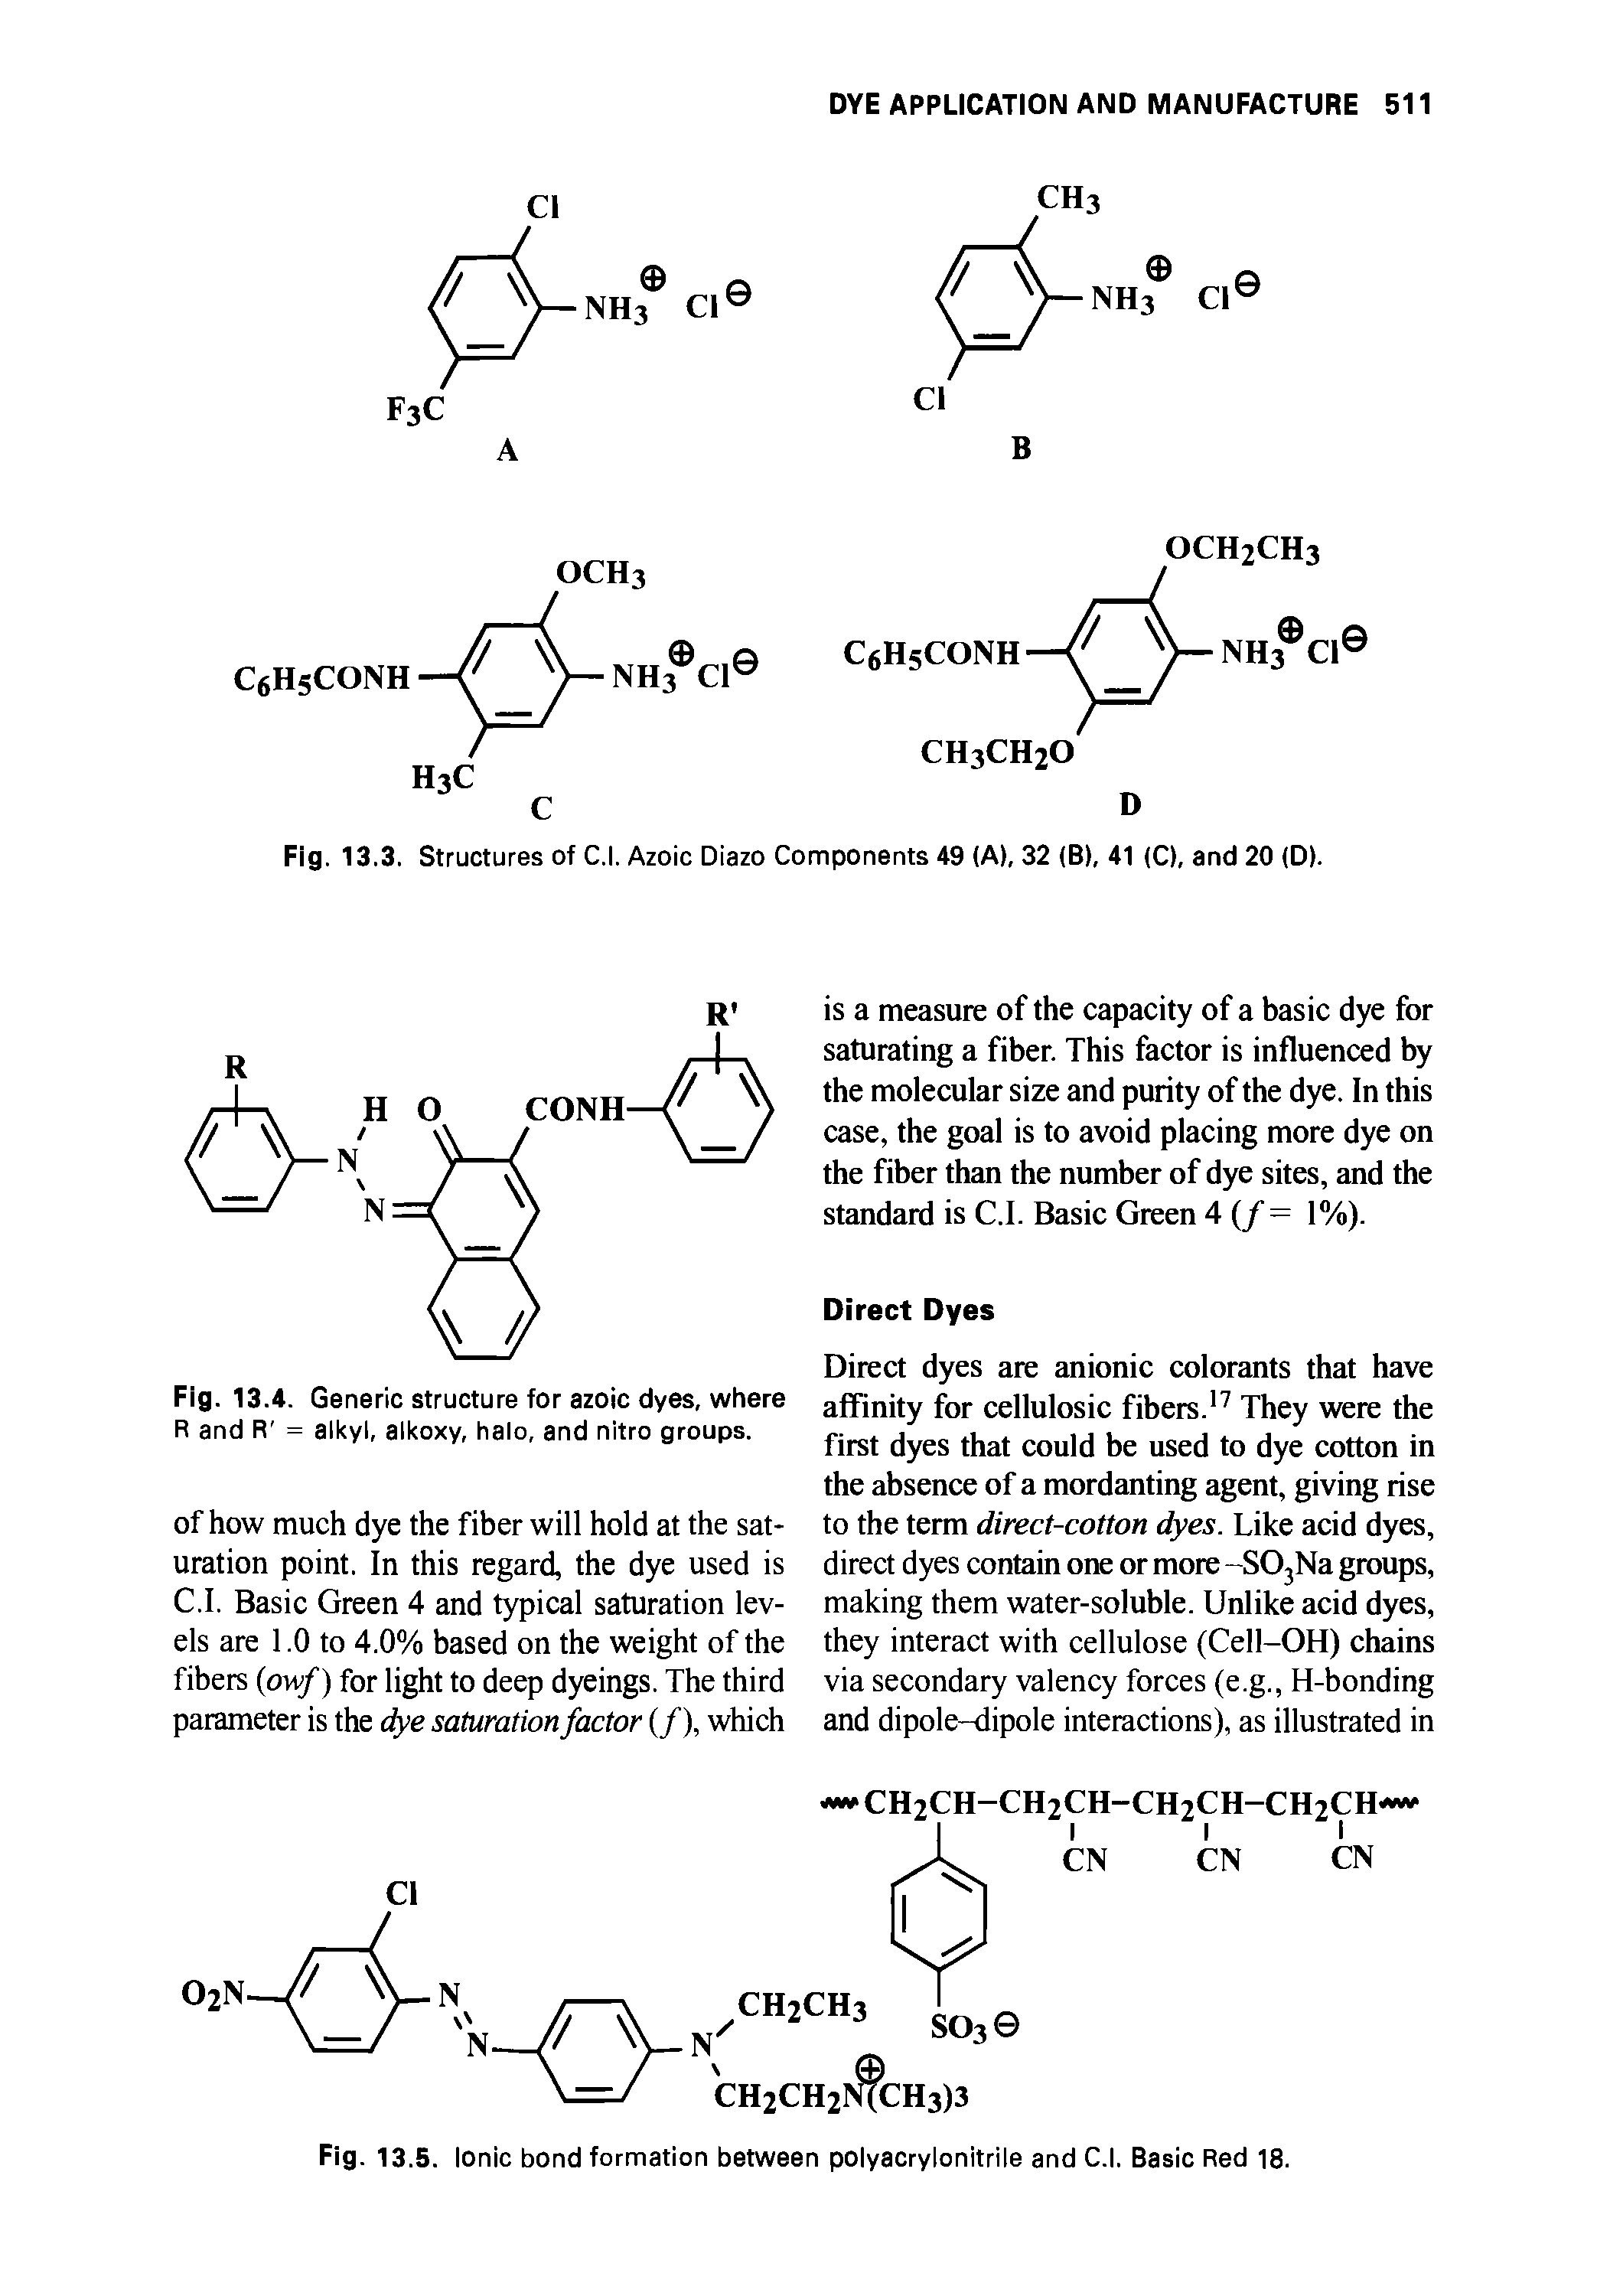 Fig. 13.5. Ionic bond formation between polyacrylonitrile and C.l. Basic Red 18.